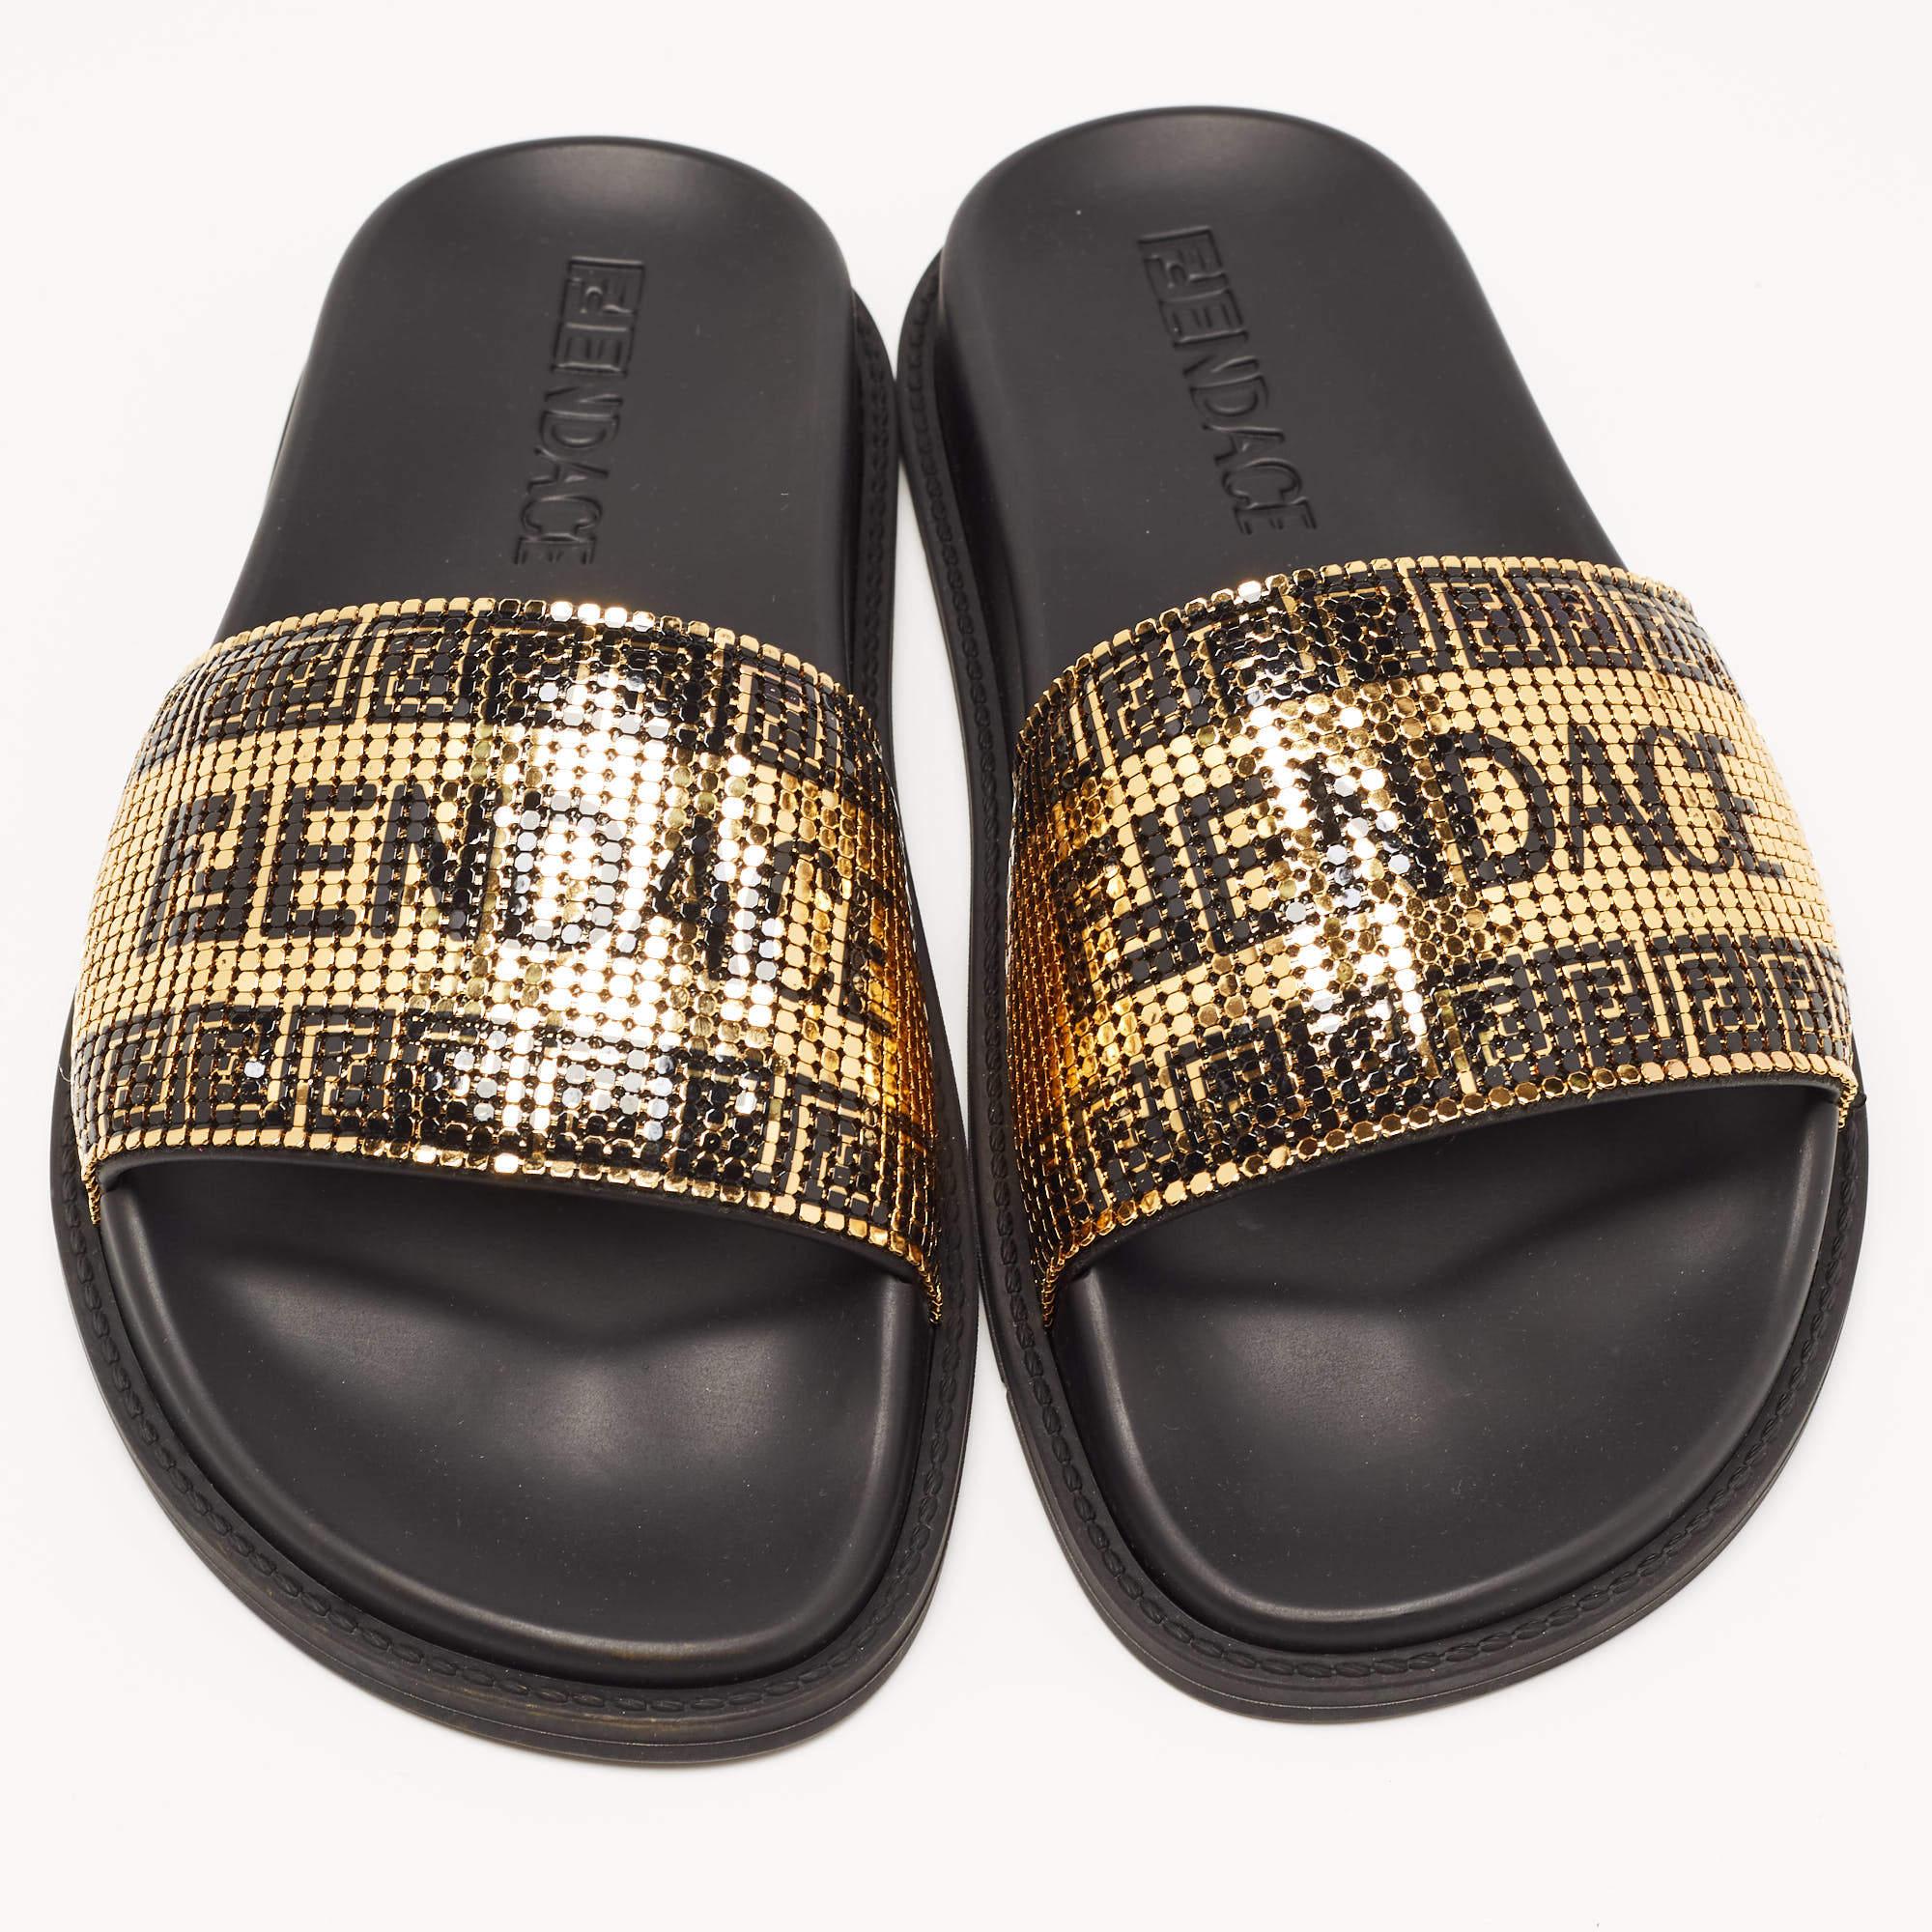 Step into sophistication and comfort with these Fendi x Versace flats for women. Exquisitely crafted, they will offer a stylish and relaxed stride.

Includes: Original Box, Info Booklet, Original Dustbag

